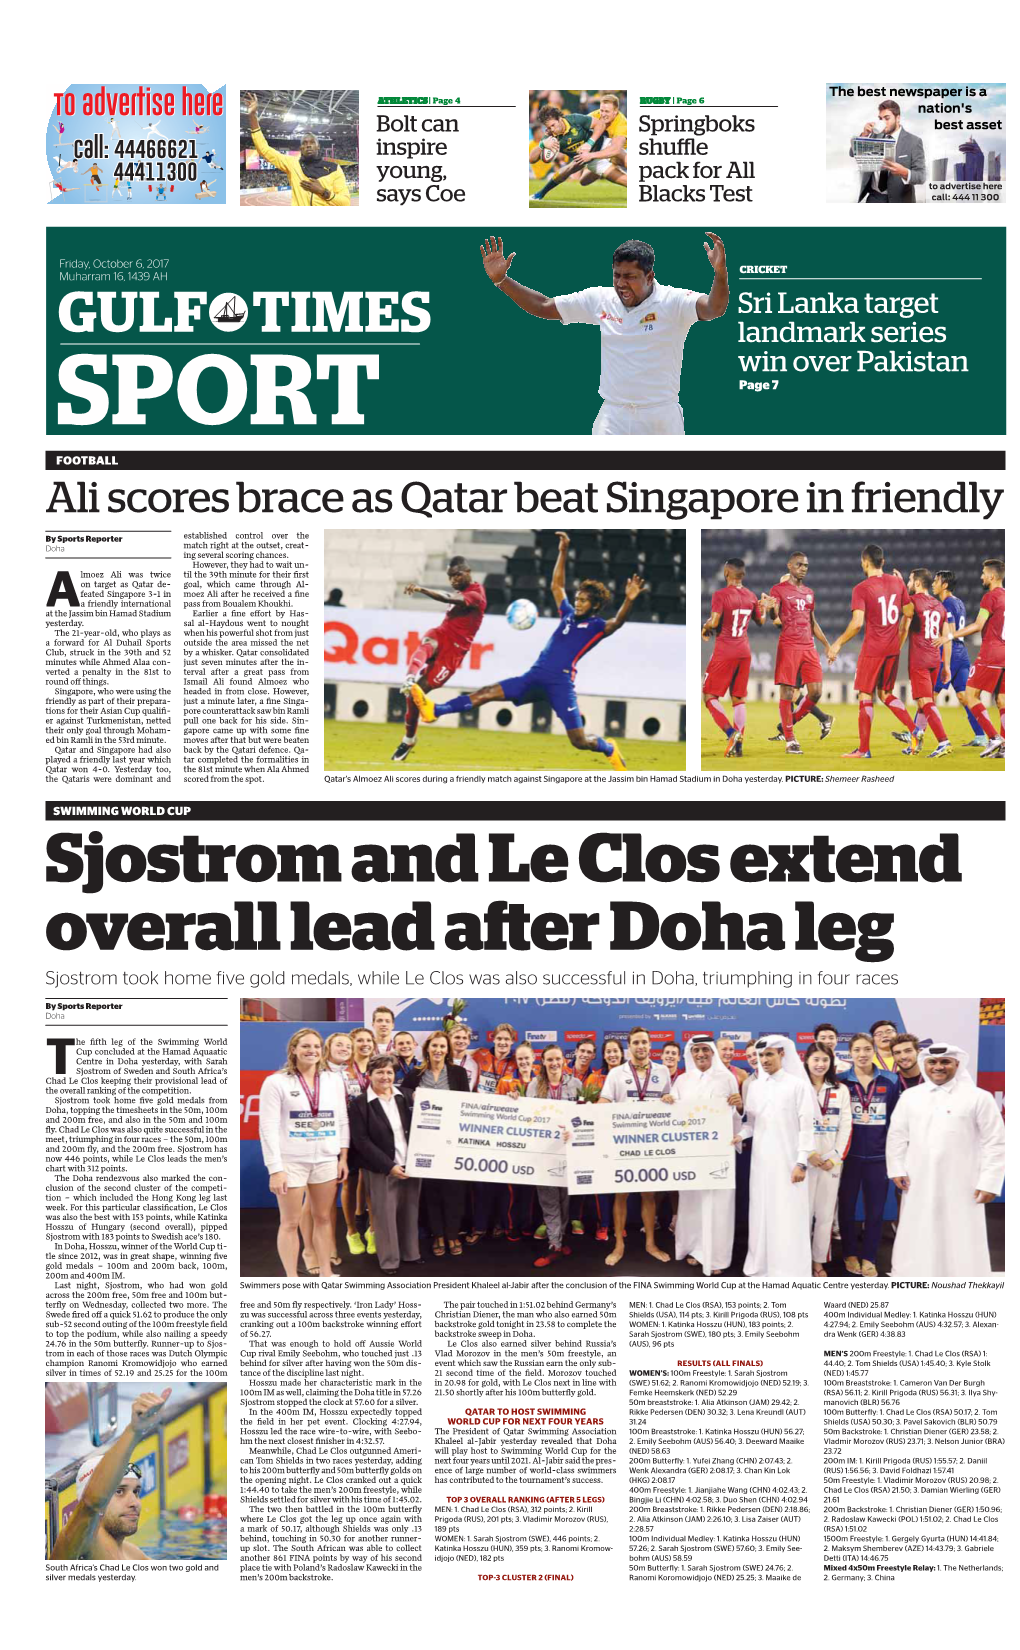 Sjostrom and Le Clos Extend Overall Lead After Doha